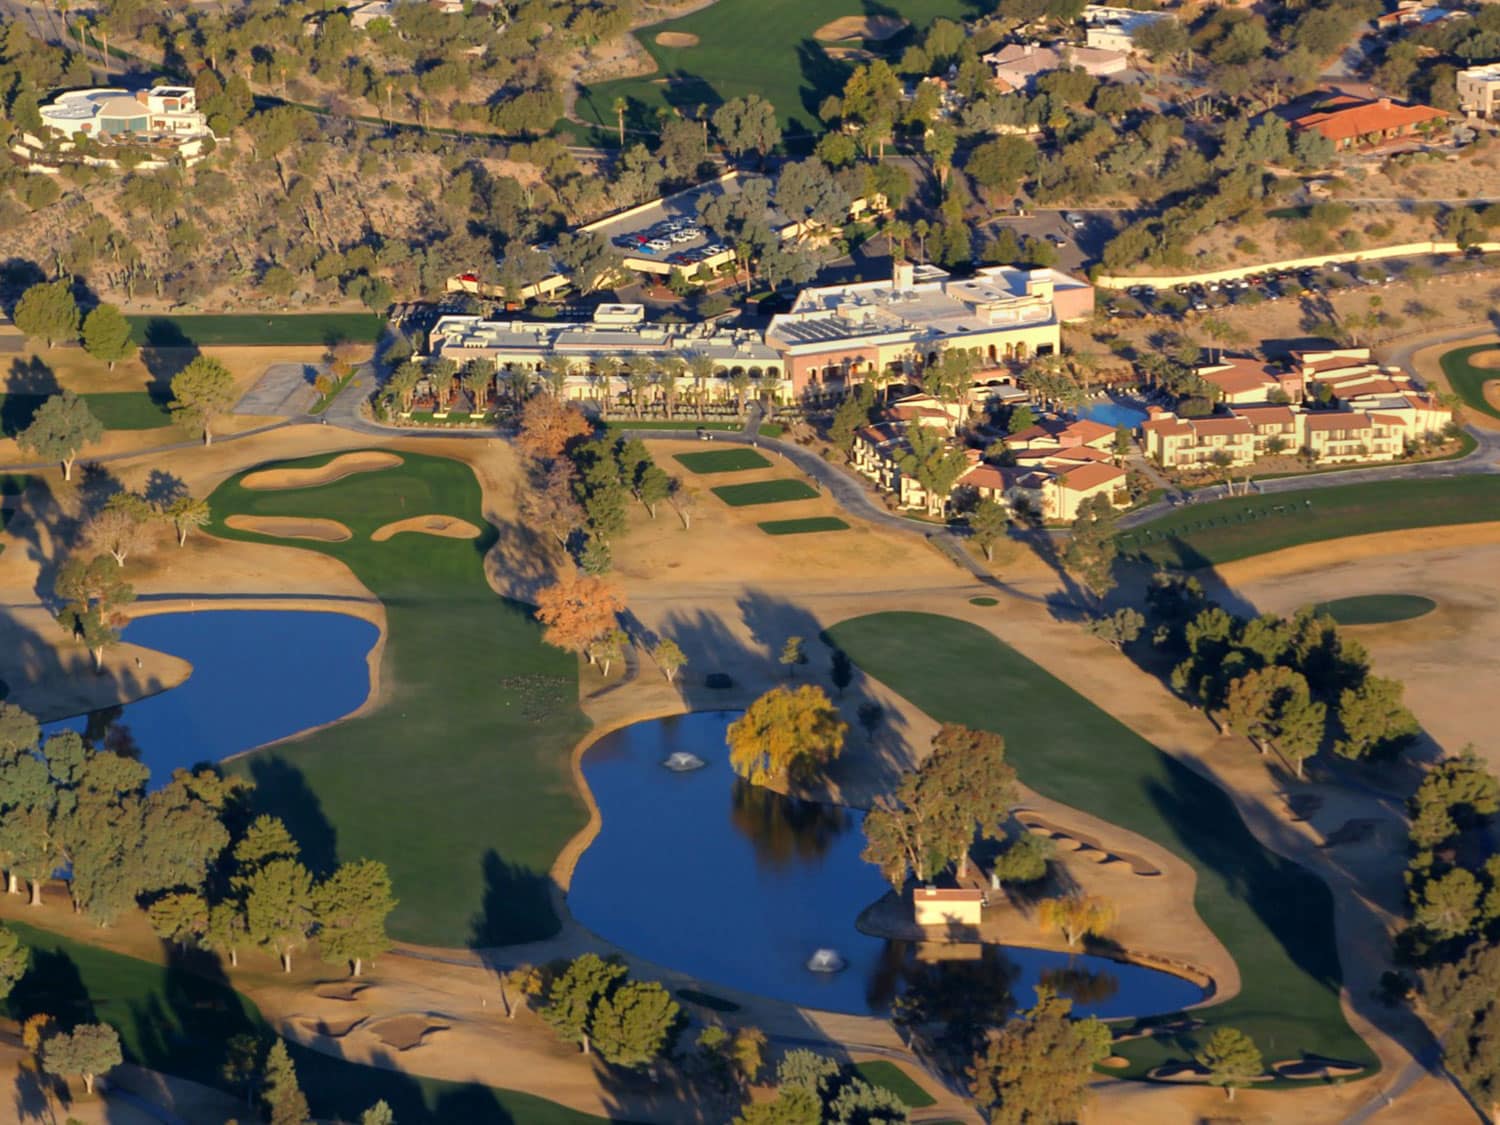 An aerial view of the resort and golf course at Omni Tucson National Resort in Arizona.